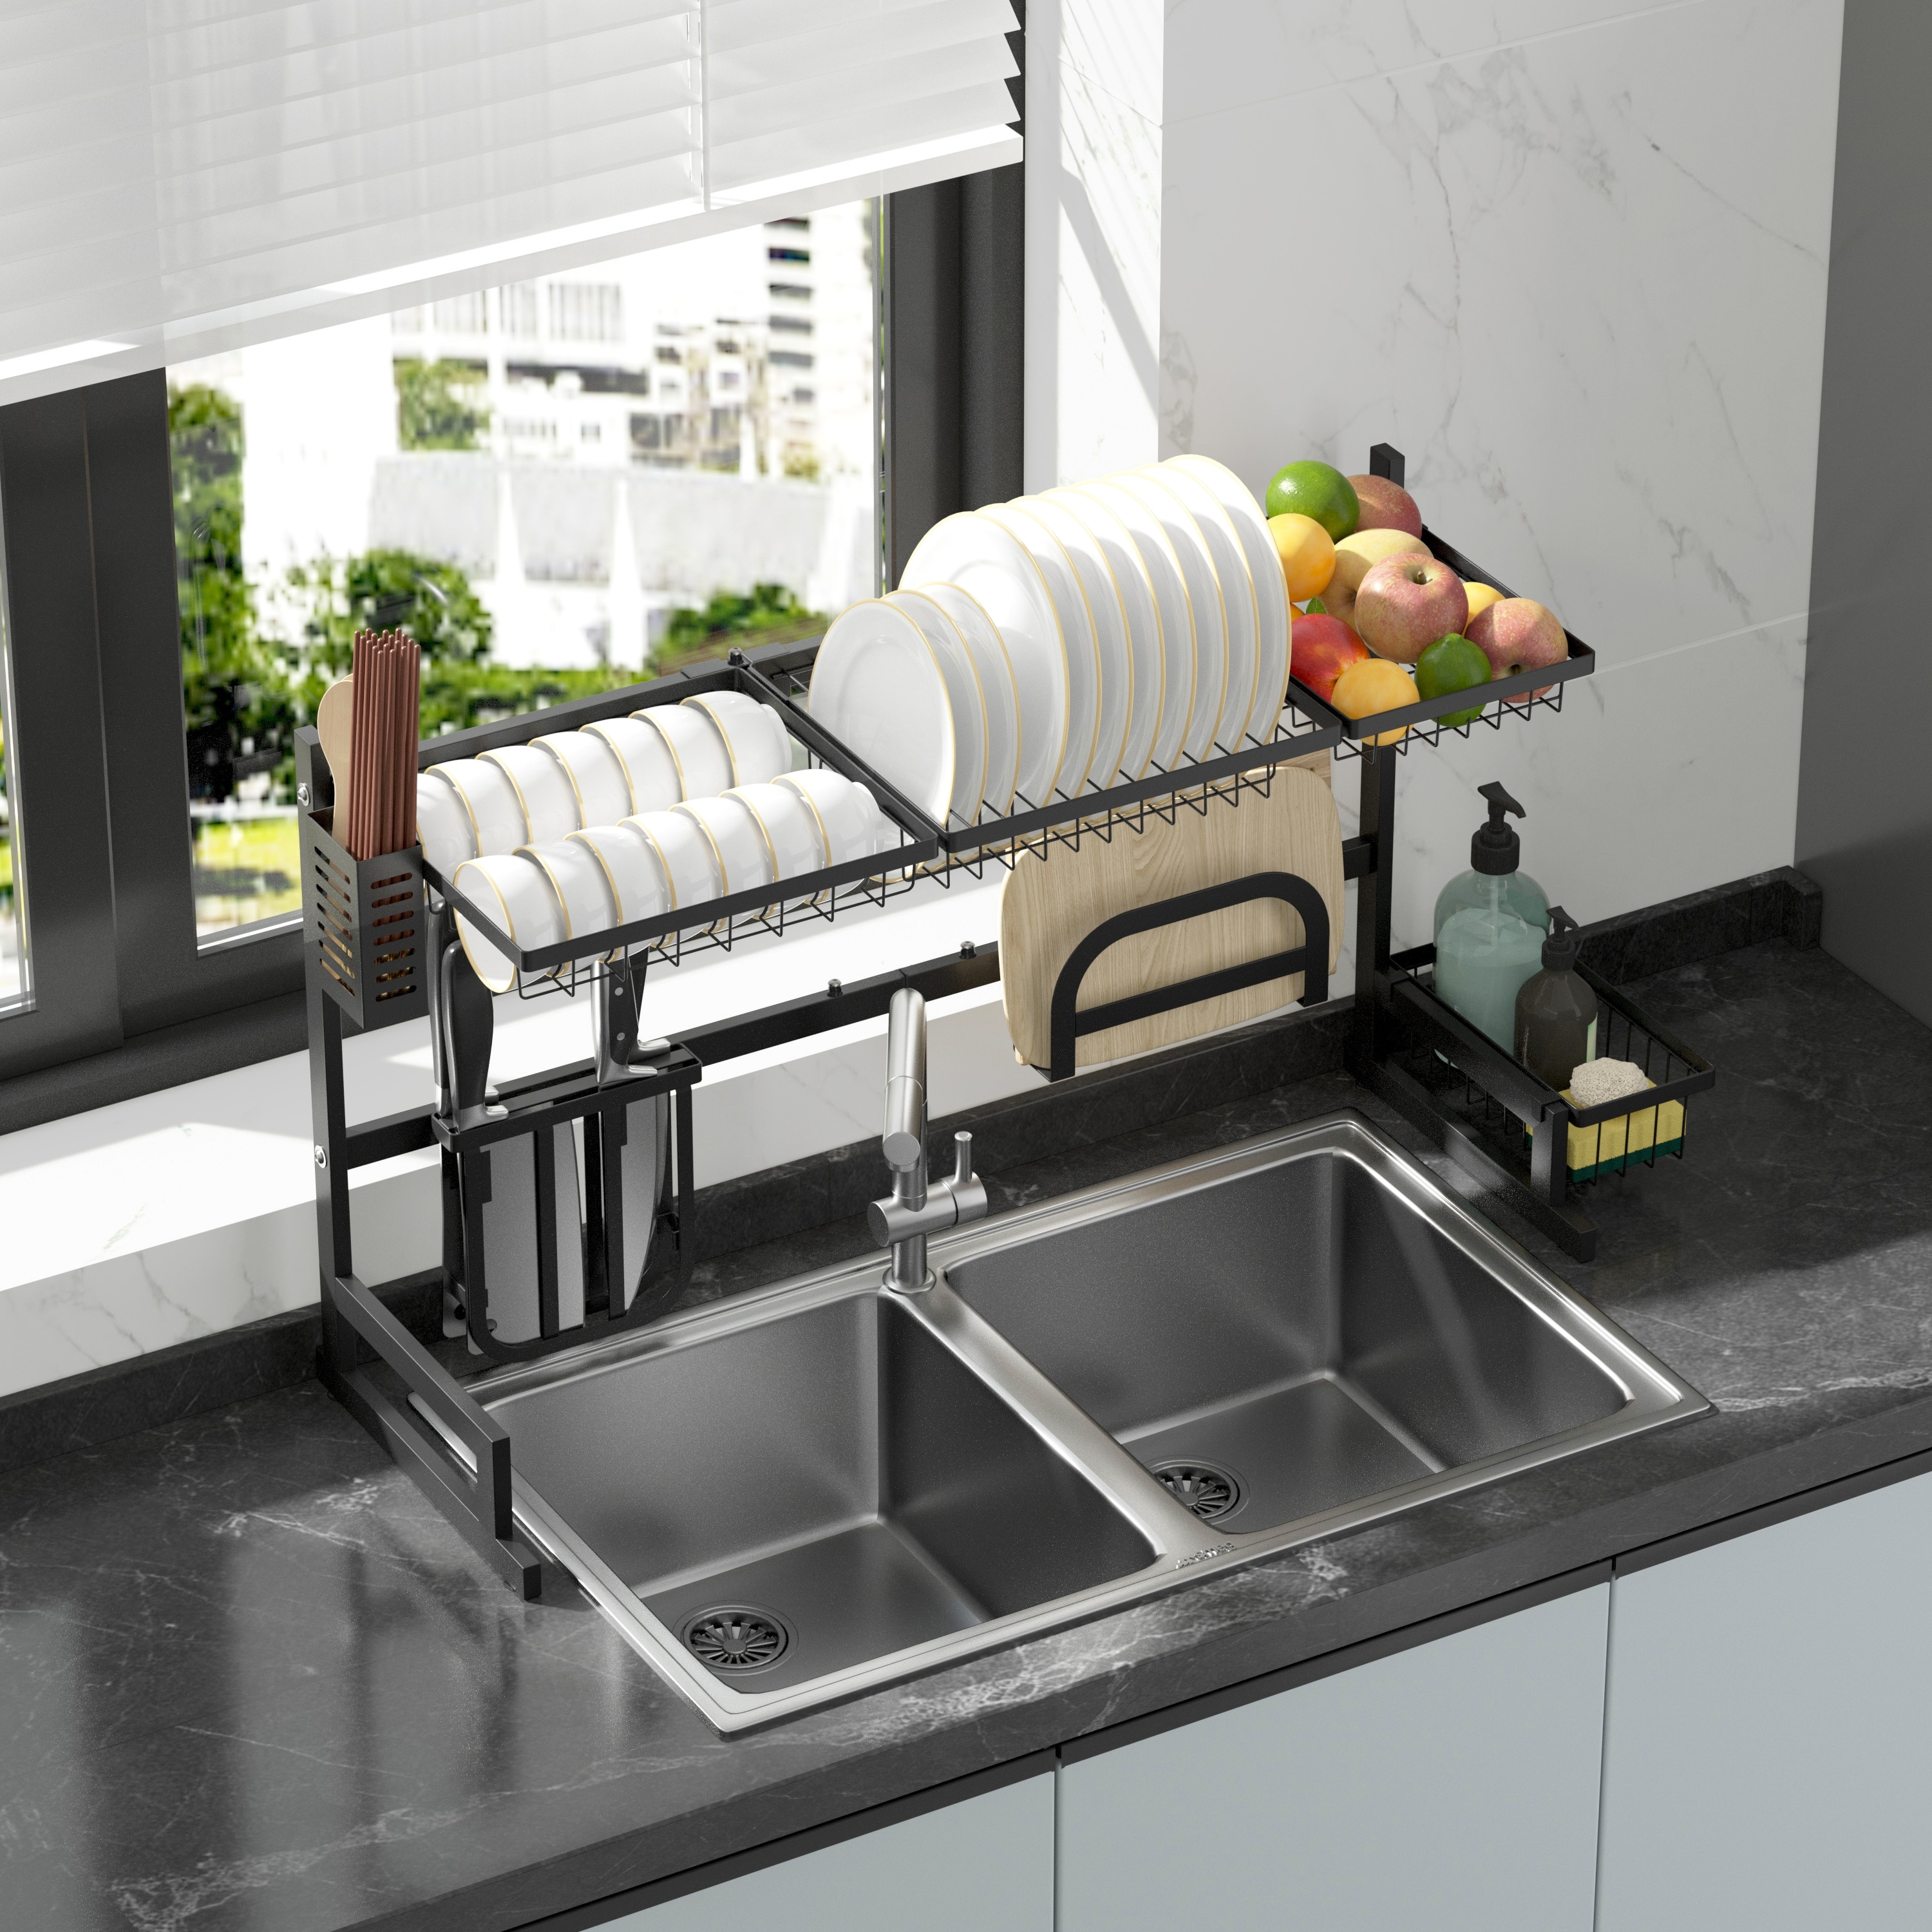 https://ak1.ostkcdn.com/images/products/is/images/direct/4597f2b7c3426393c2e455bc6e379a33692ac88b/Adjustable-Large-Dish-Drying-Rack-Metal-Over-the-Sink-Storage-Kitchen.jpg